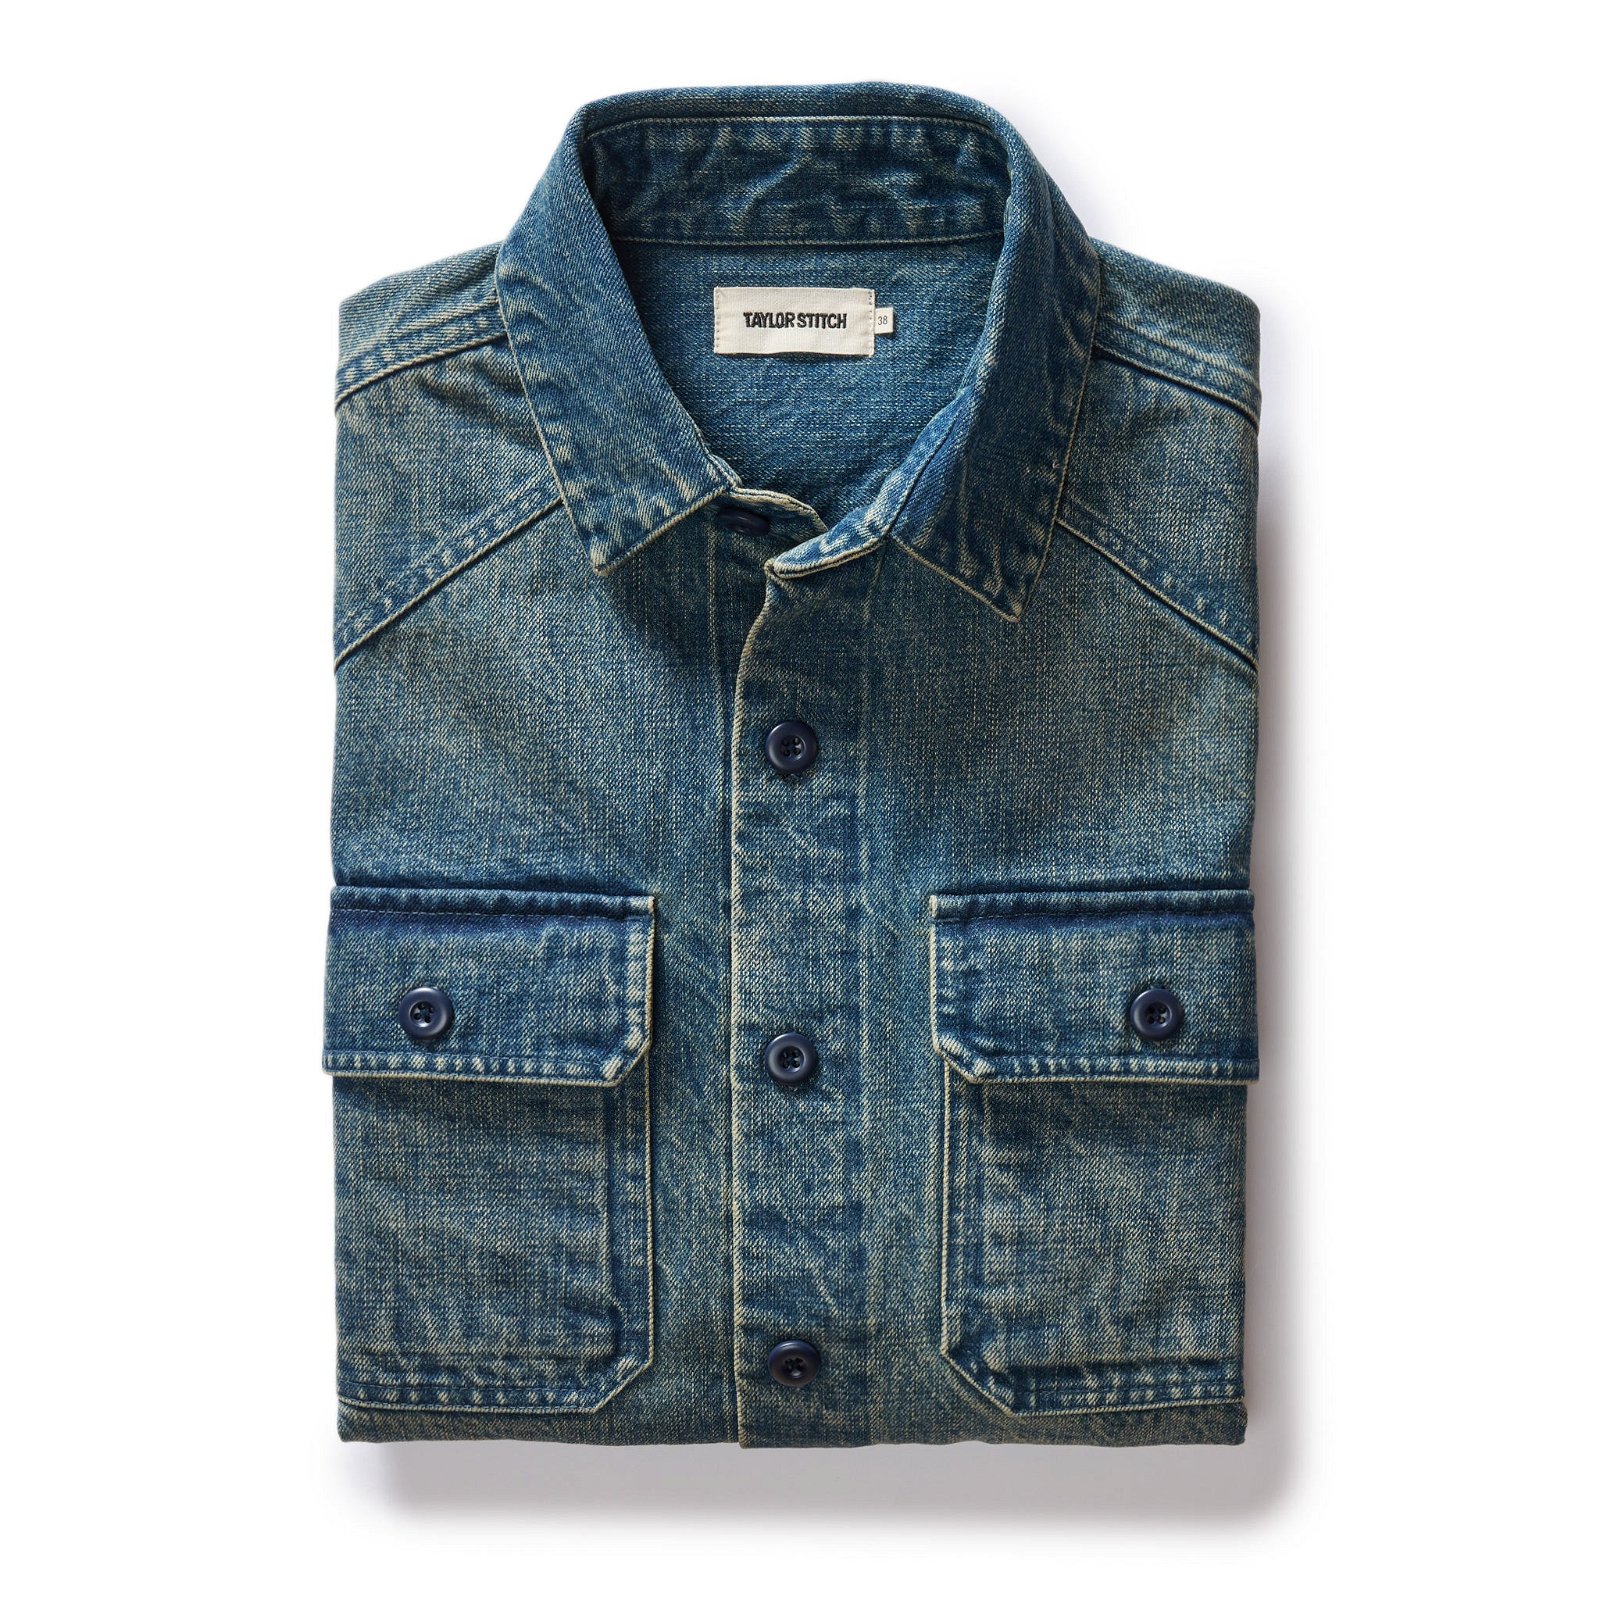 Image of The Shop Shirt in Sawyer Wash Selvage Denim